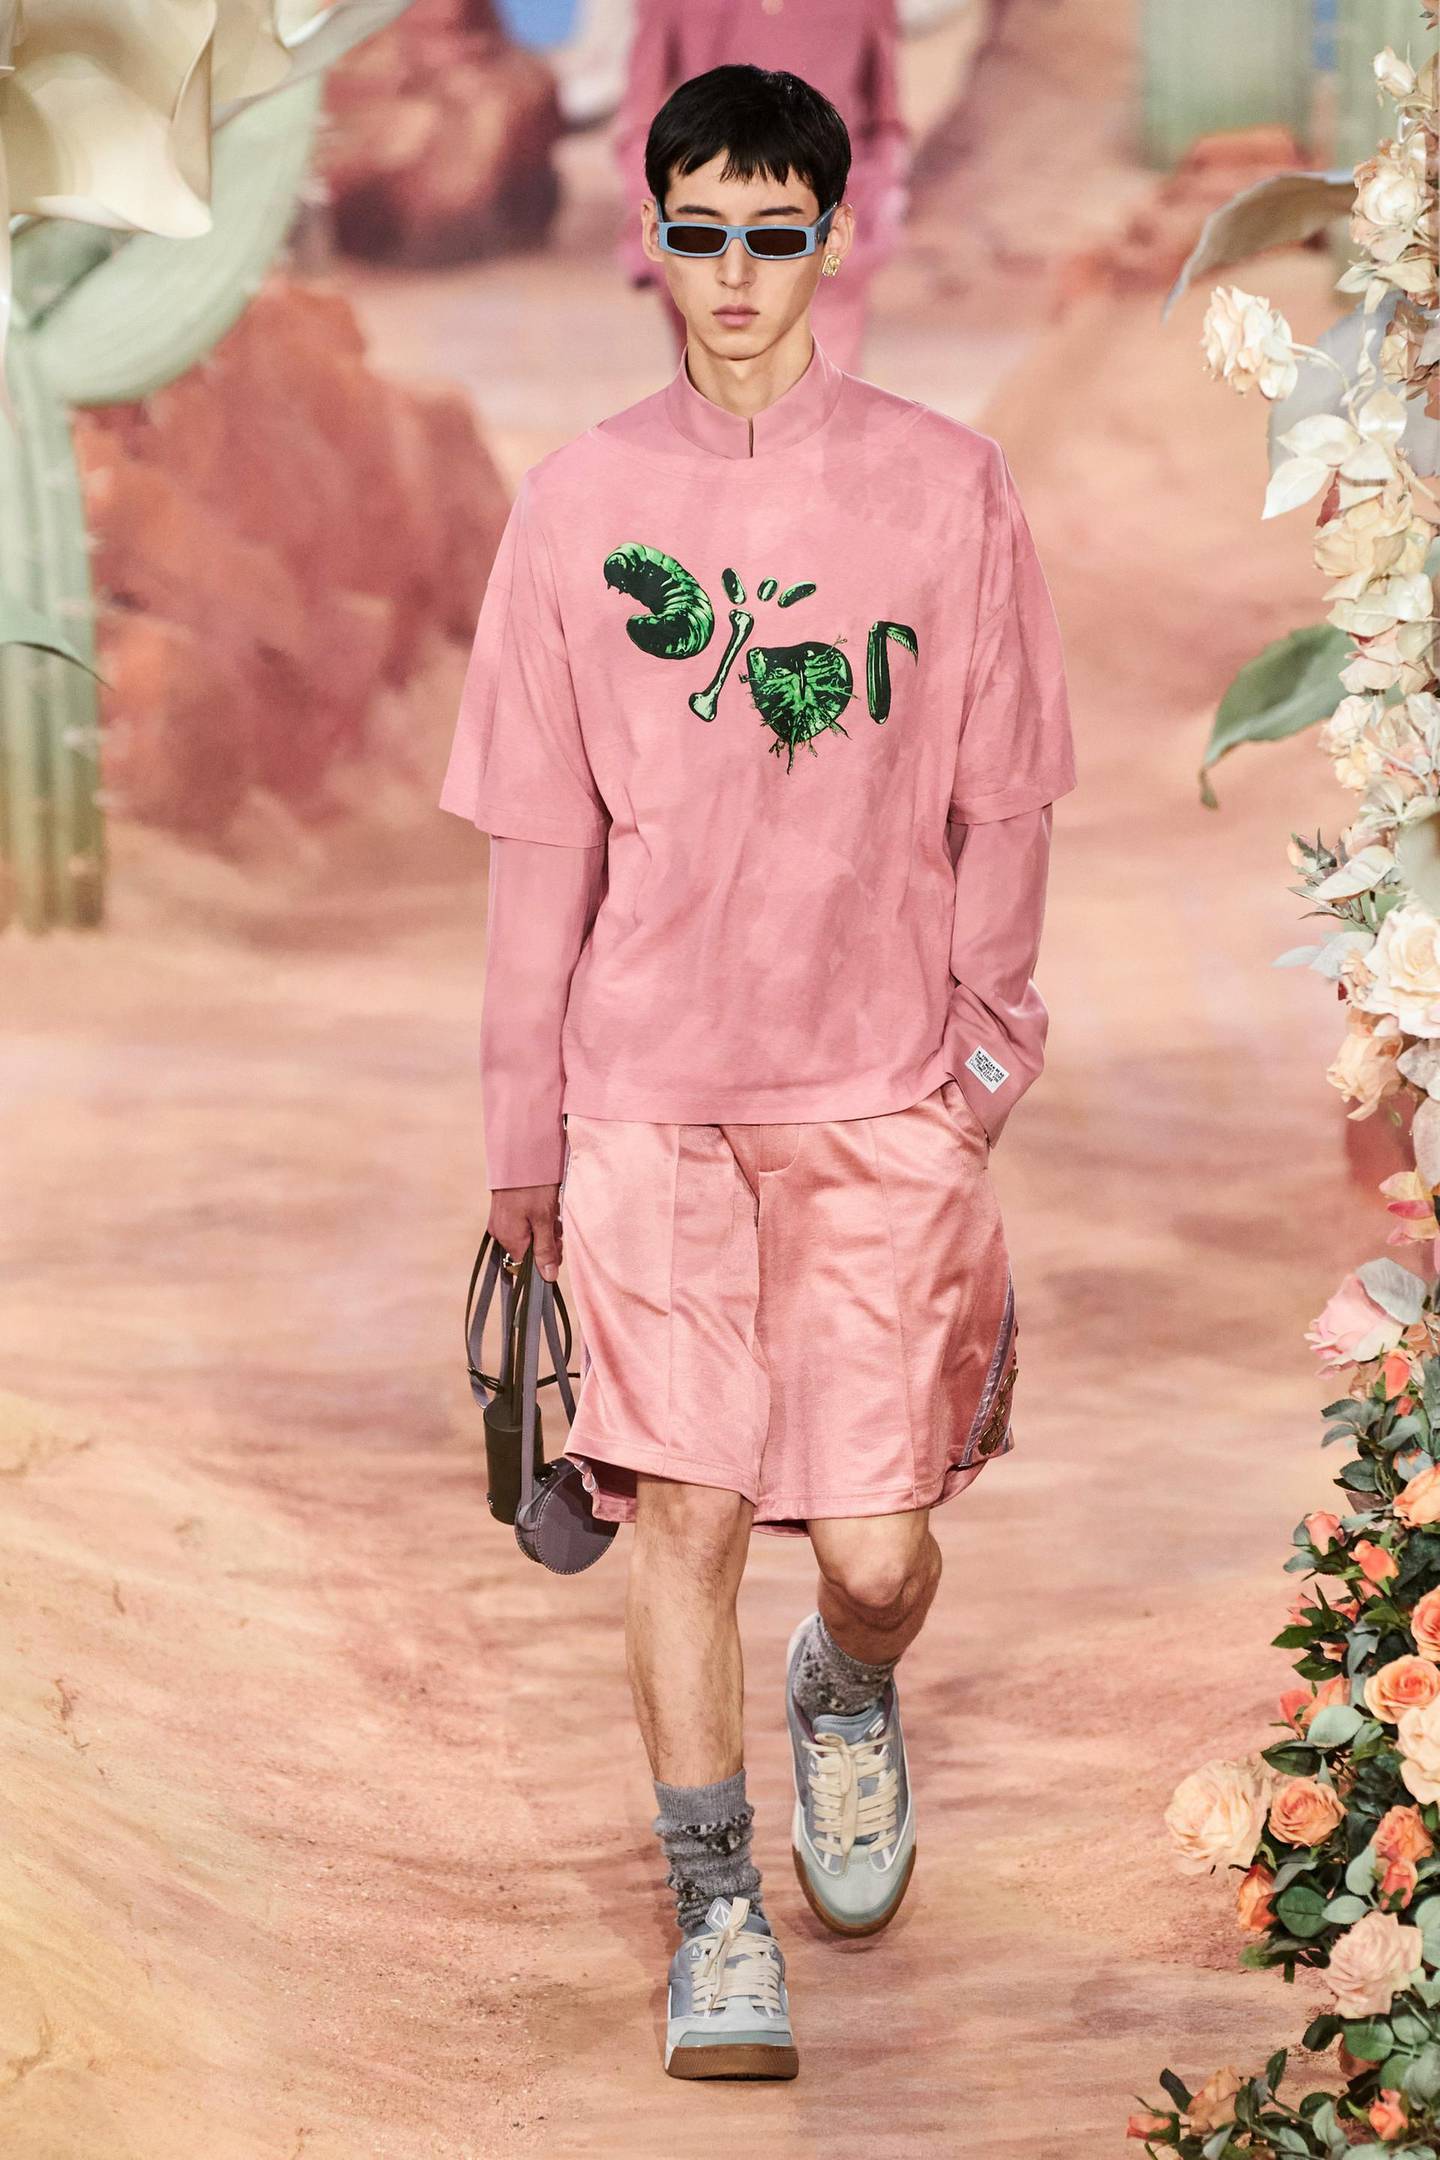 Inspired by Kim Jones and rapper Travis Scott, the new spring/summer 2022 men's collection has a top with the word 'Dior' spelt out in cacti. Courtesy Courtesy Dior